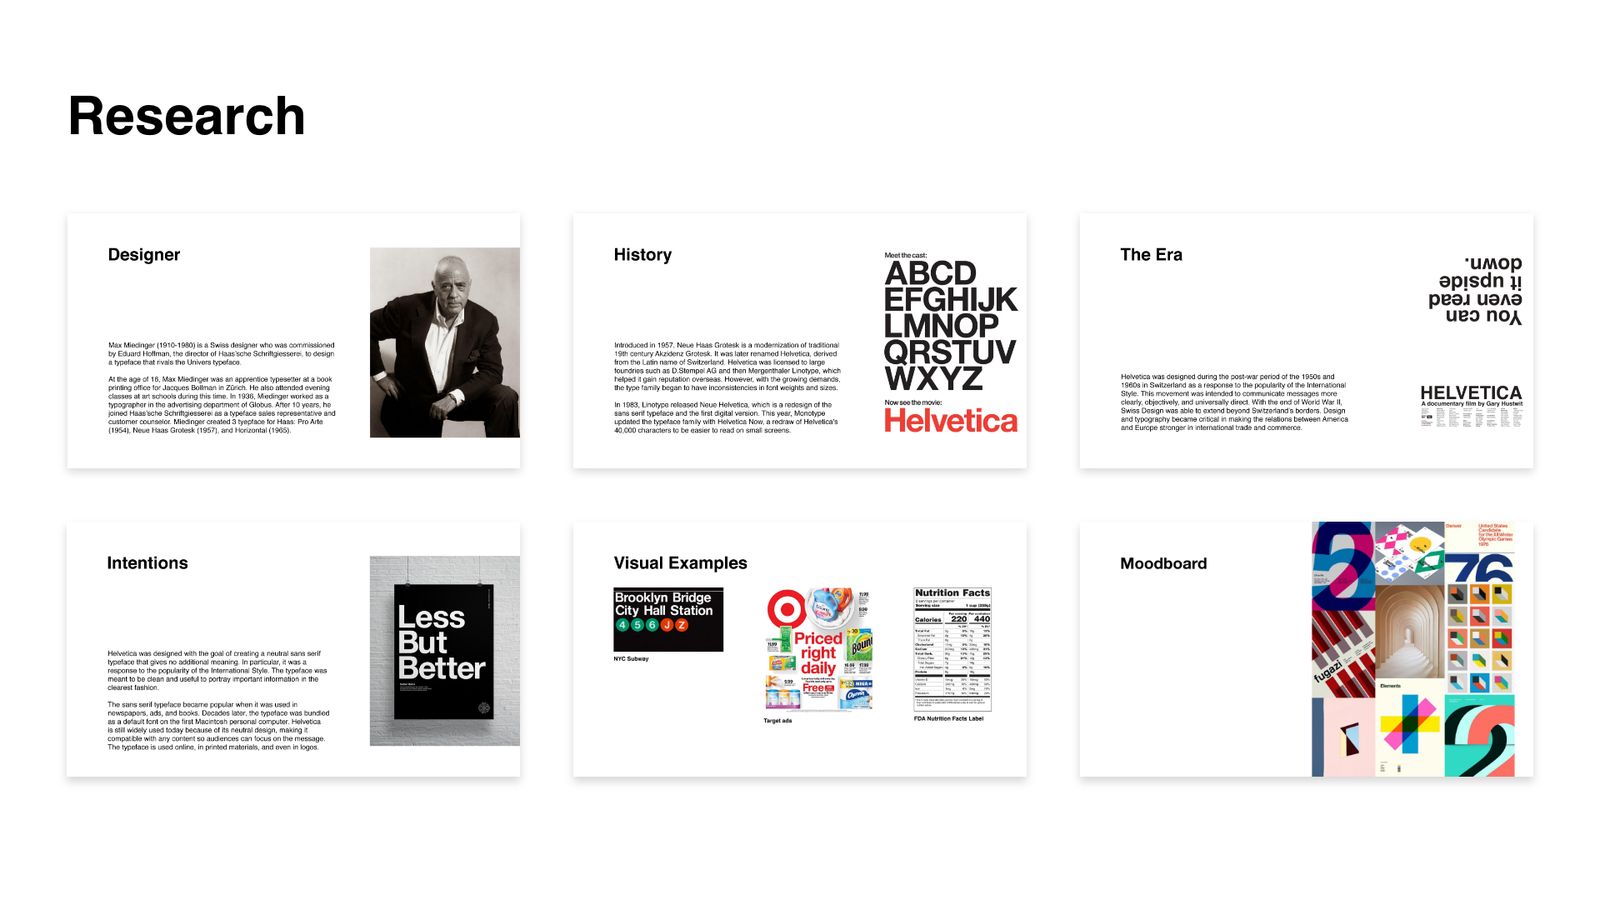 This timeline project was inspired by the typeface Helvetica. It became one of the key factors that distinguished the Swiss Style.